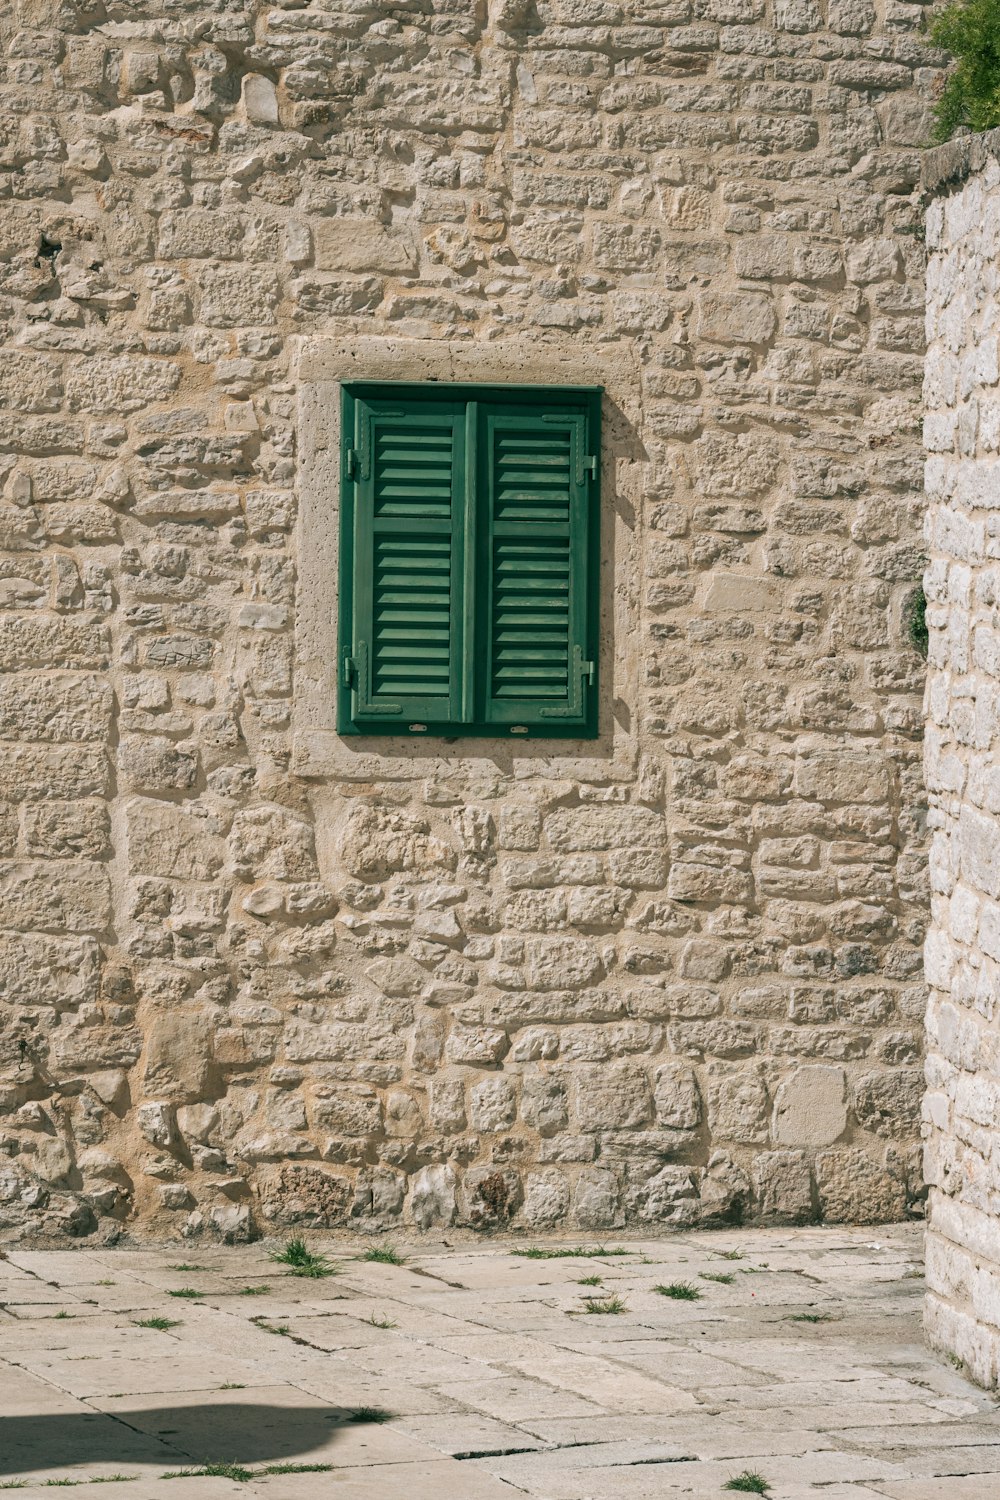 a stone building with a green window and green shutters